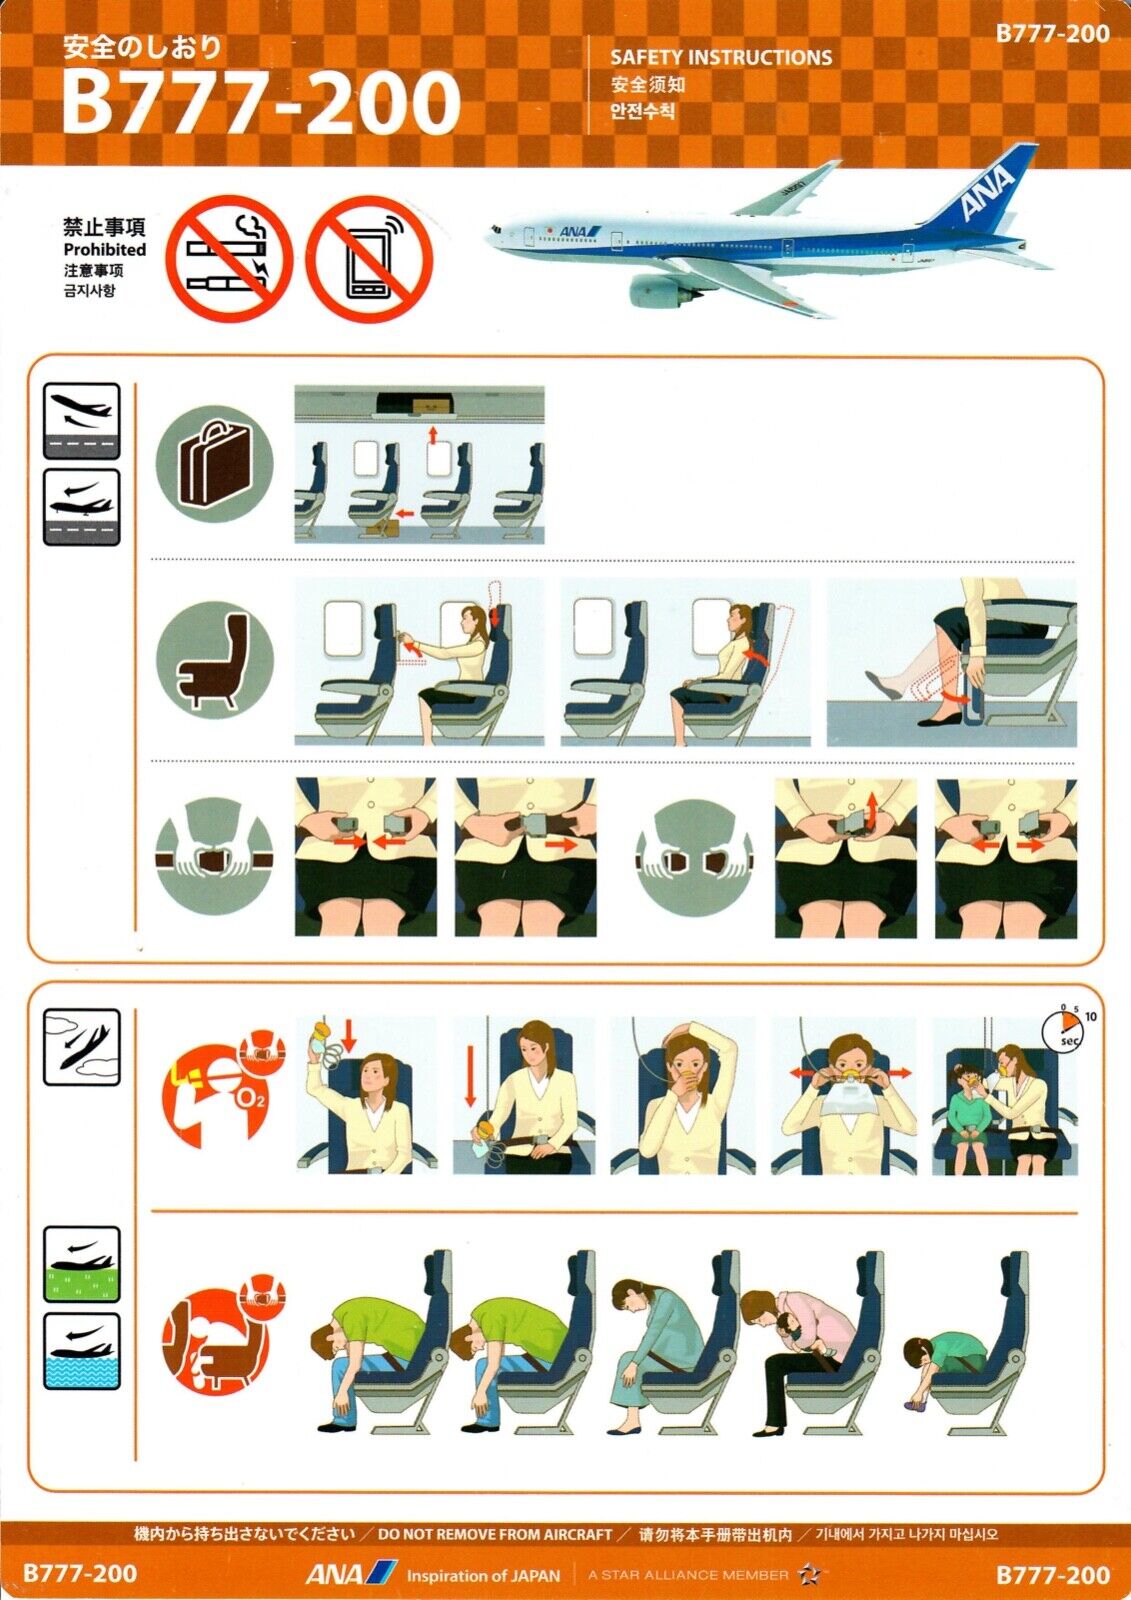 2004 ANA ALL NIPPON AIRLINES Japan BOING 777-200 Orange Safety Card